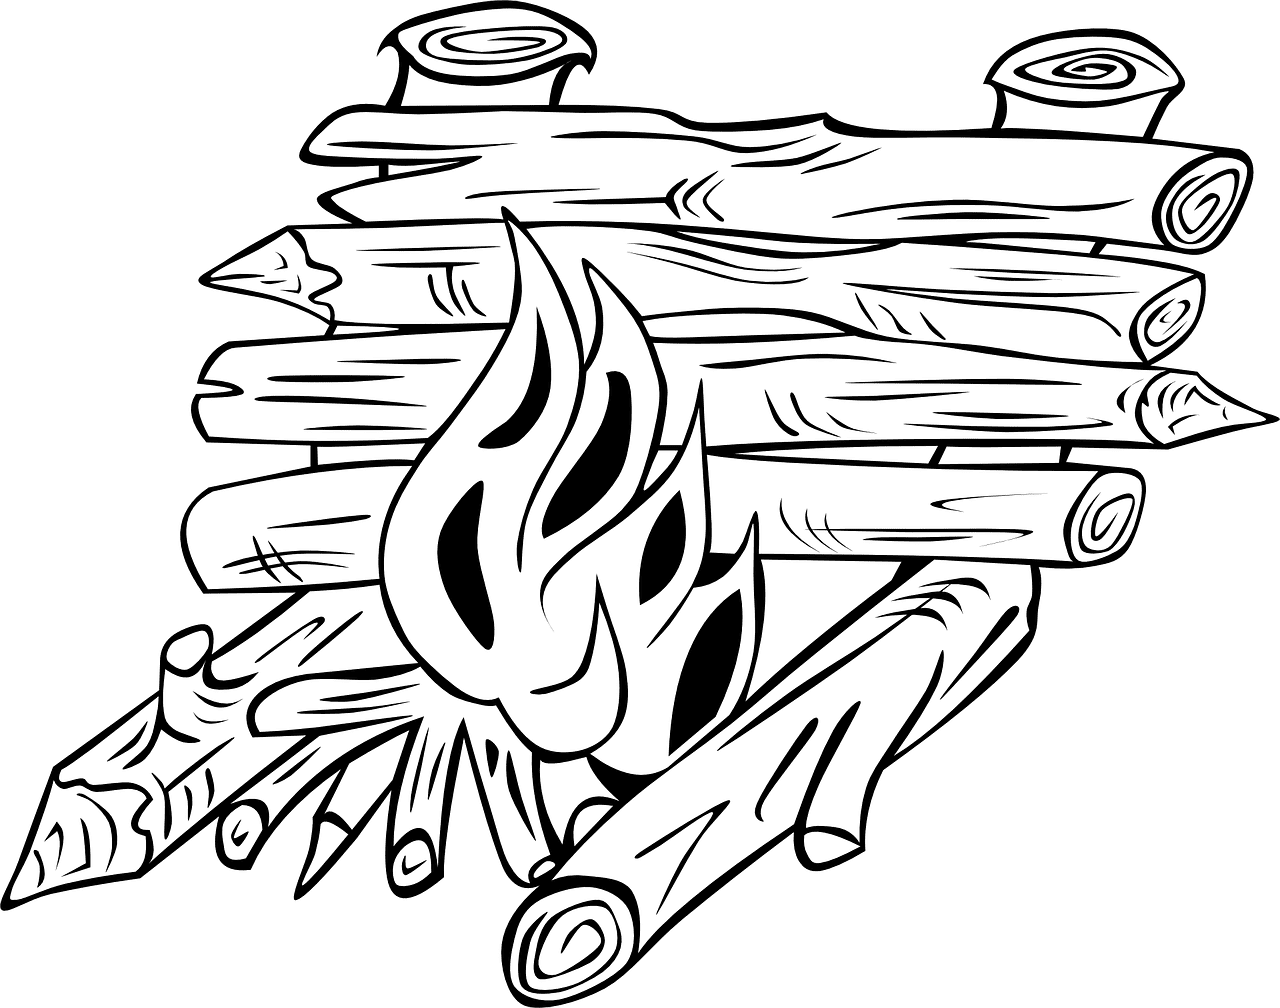 Campfires Camp Cooking Coloring Page